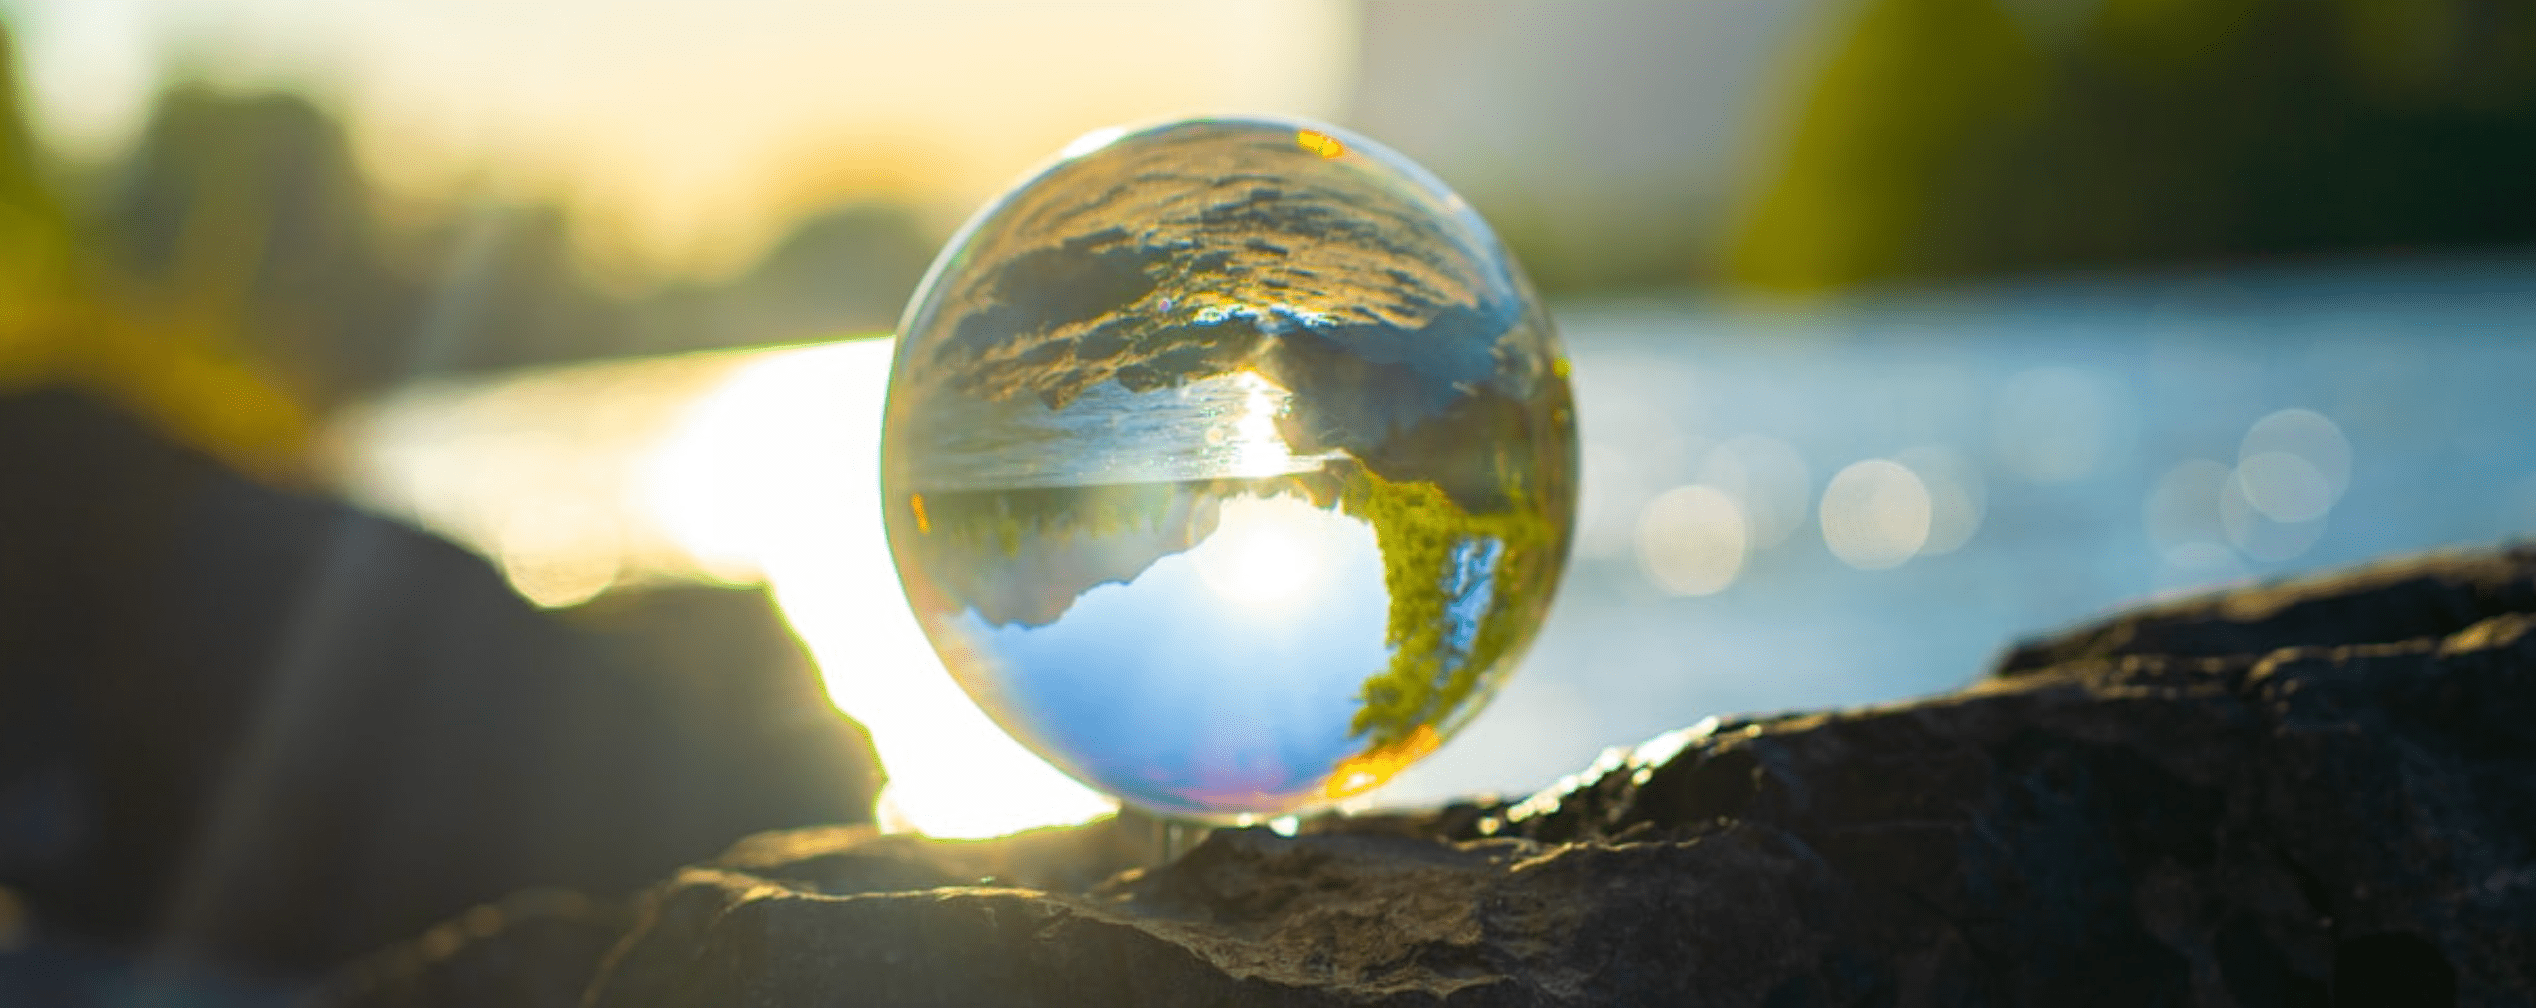 A clear marble showing a shot of a river and mountains